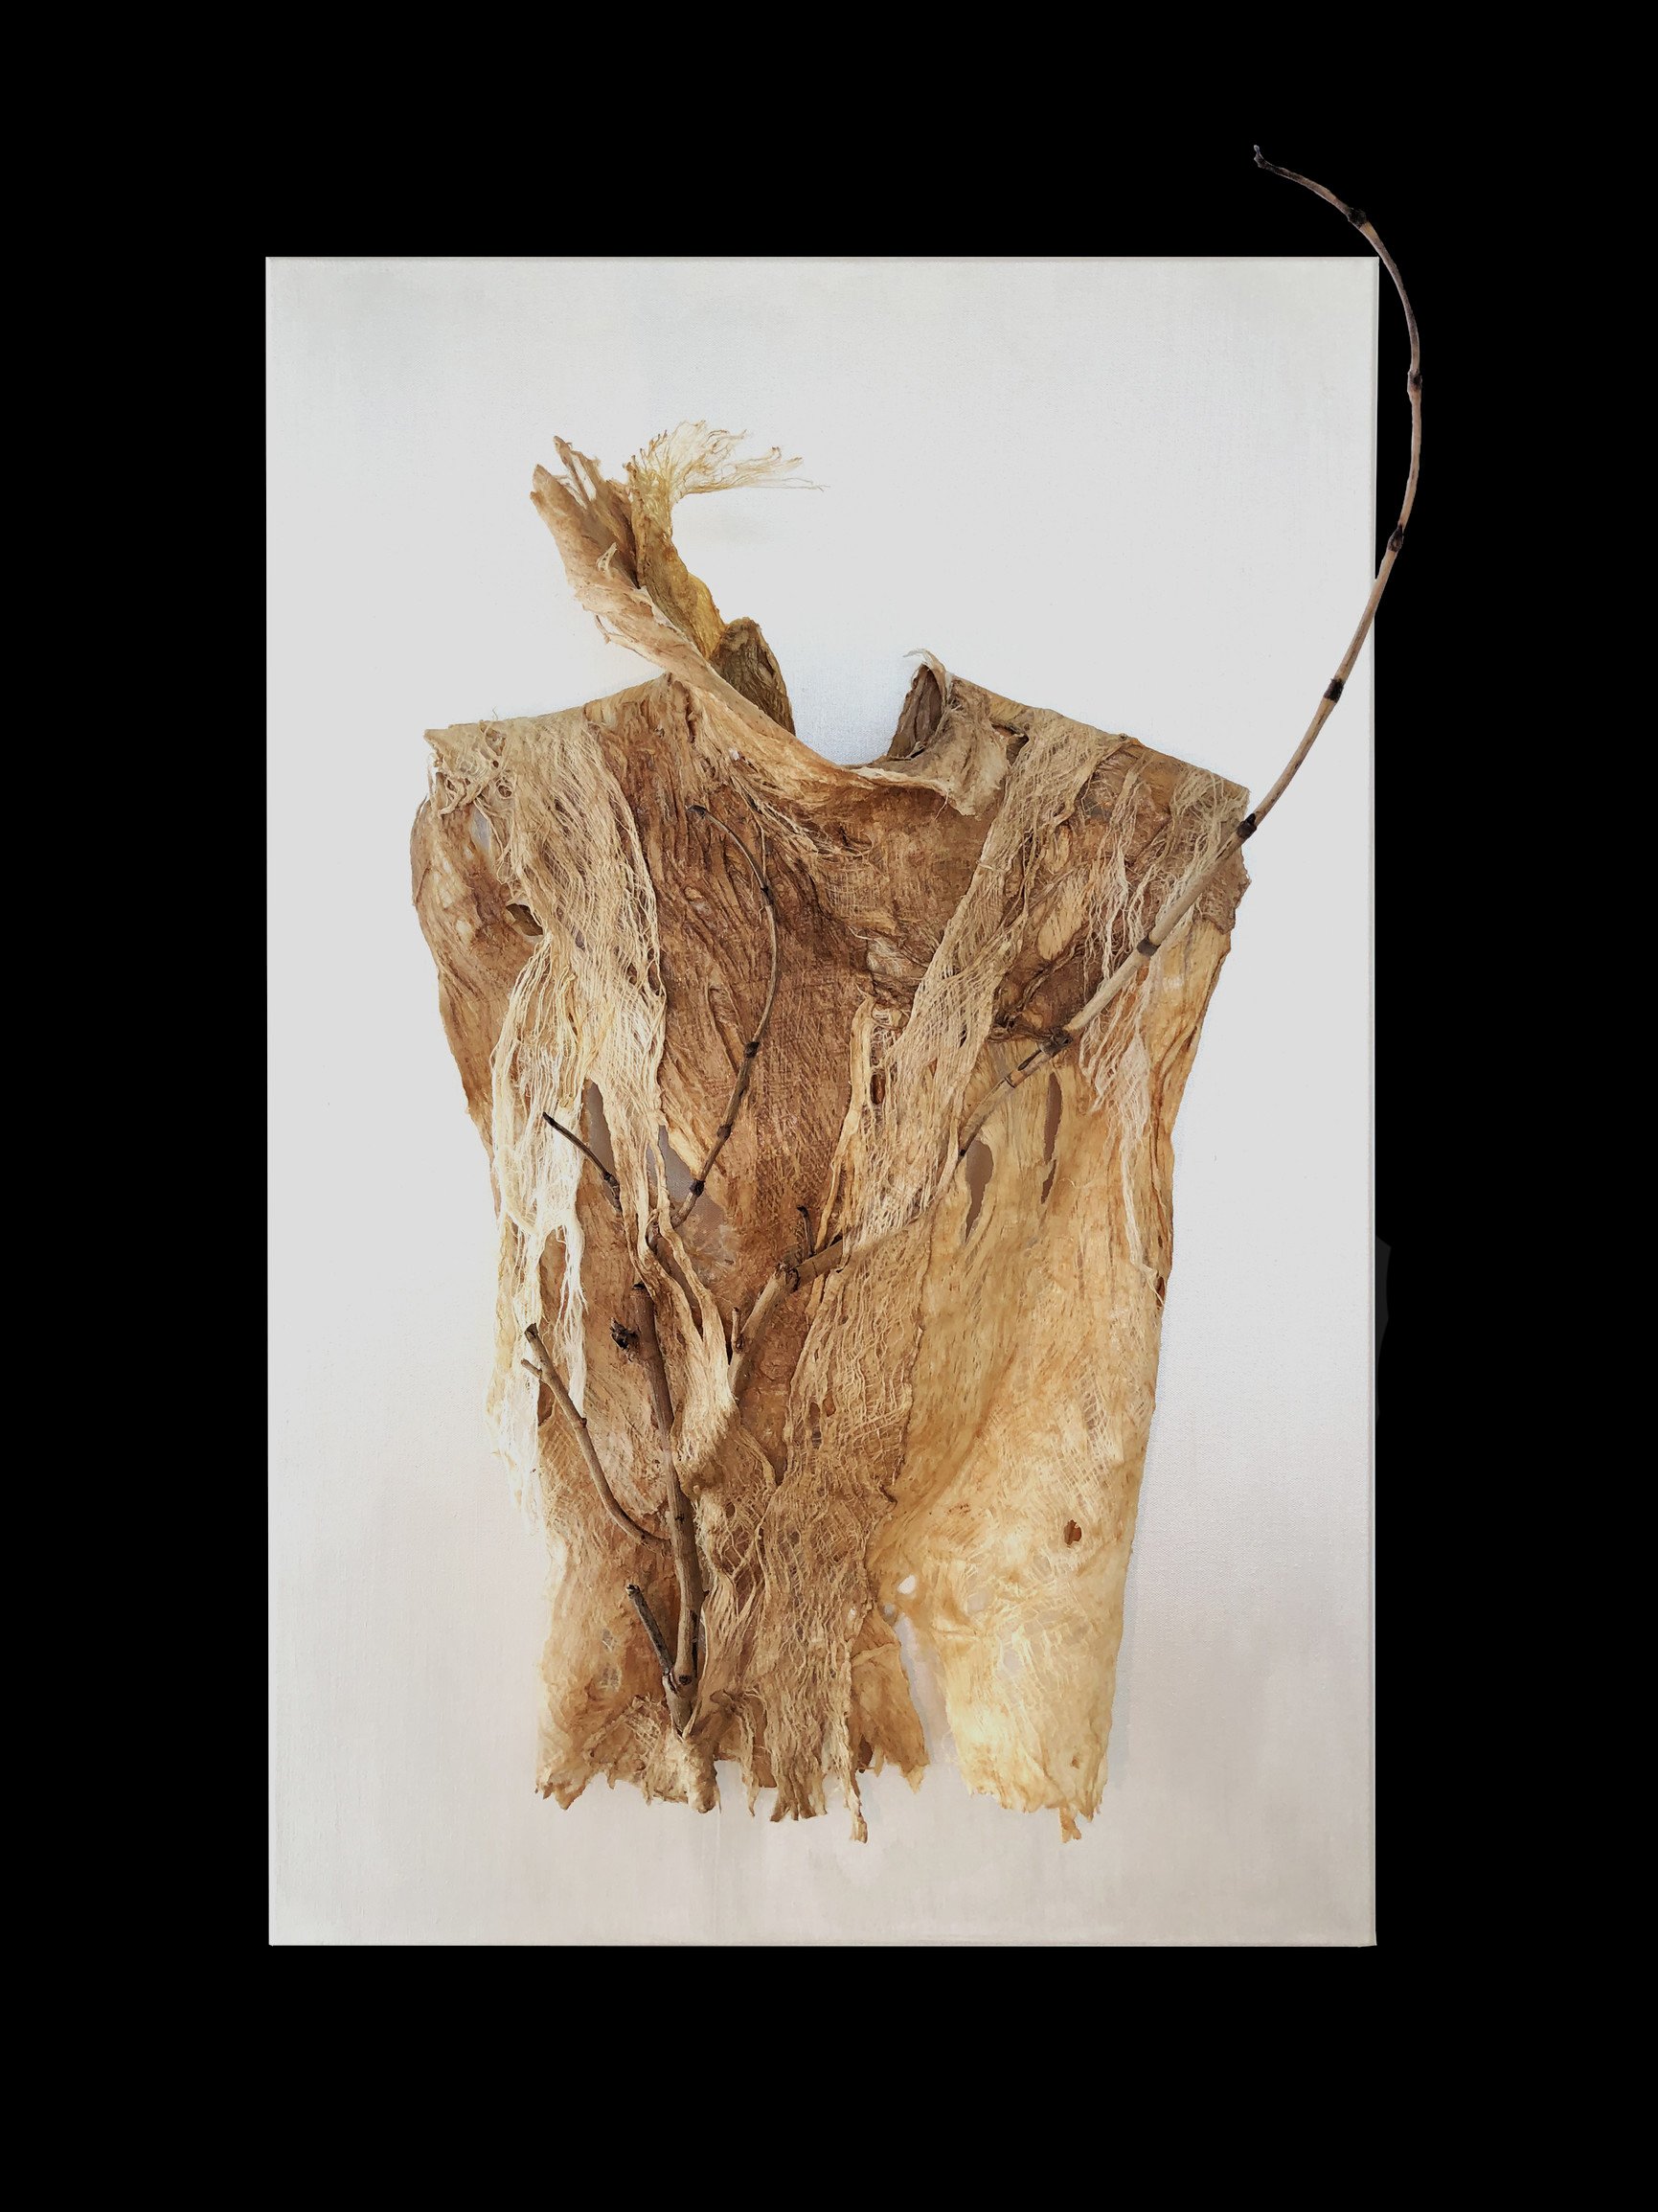 Frances Vye Wilson_Strength_2016_Cambium fiber from Asian mulberry tree and sea grape_40in x 20in x 17in (1).jpg